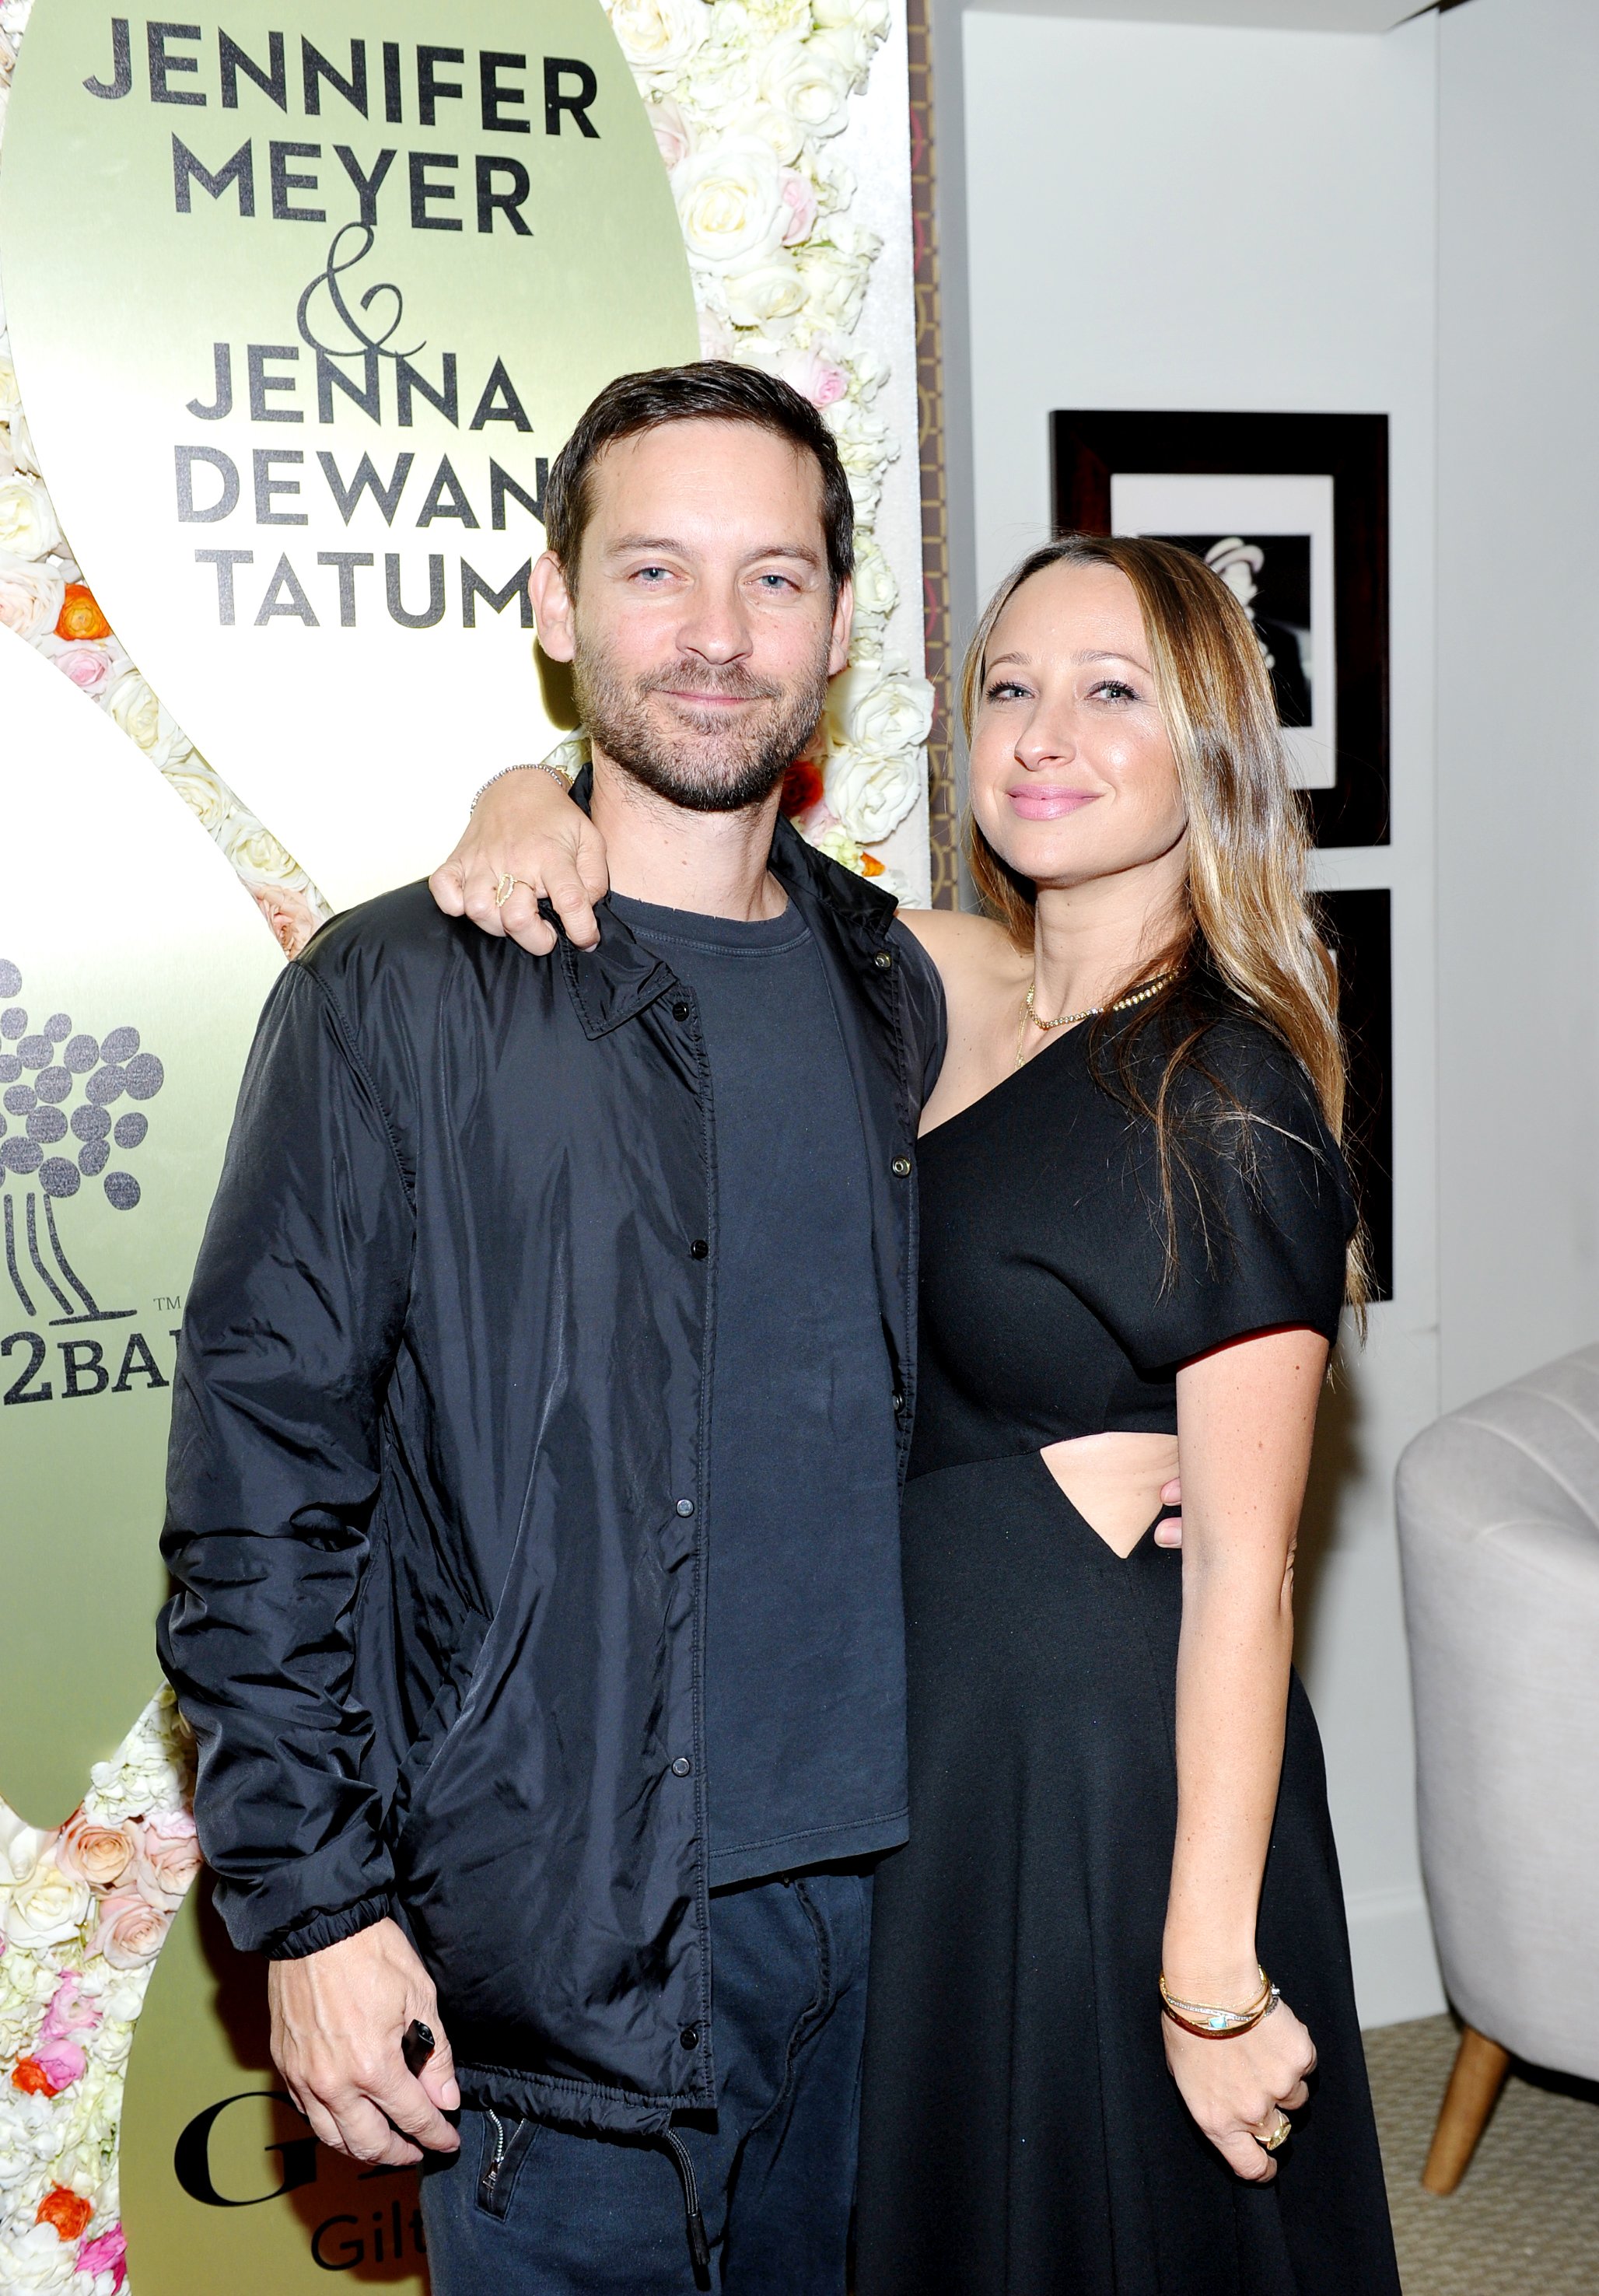 Tobey Maguire and Jennifer Meyer at Gilt.com, Jennifer Meyer & Jenna Dewan Tatum's Exclusive Jewelry Collection Launch Benefitting Baby2Baby at Sunset Tower Hotel on December 7, 2017 in West Hollywood, California. | Source: Getty Images